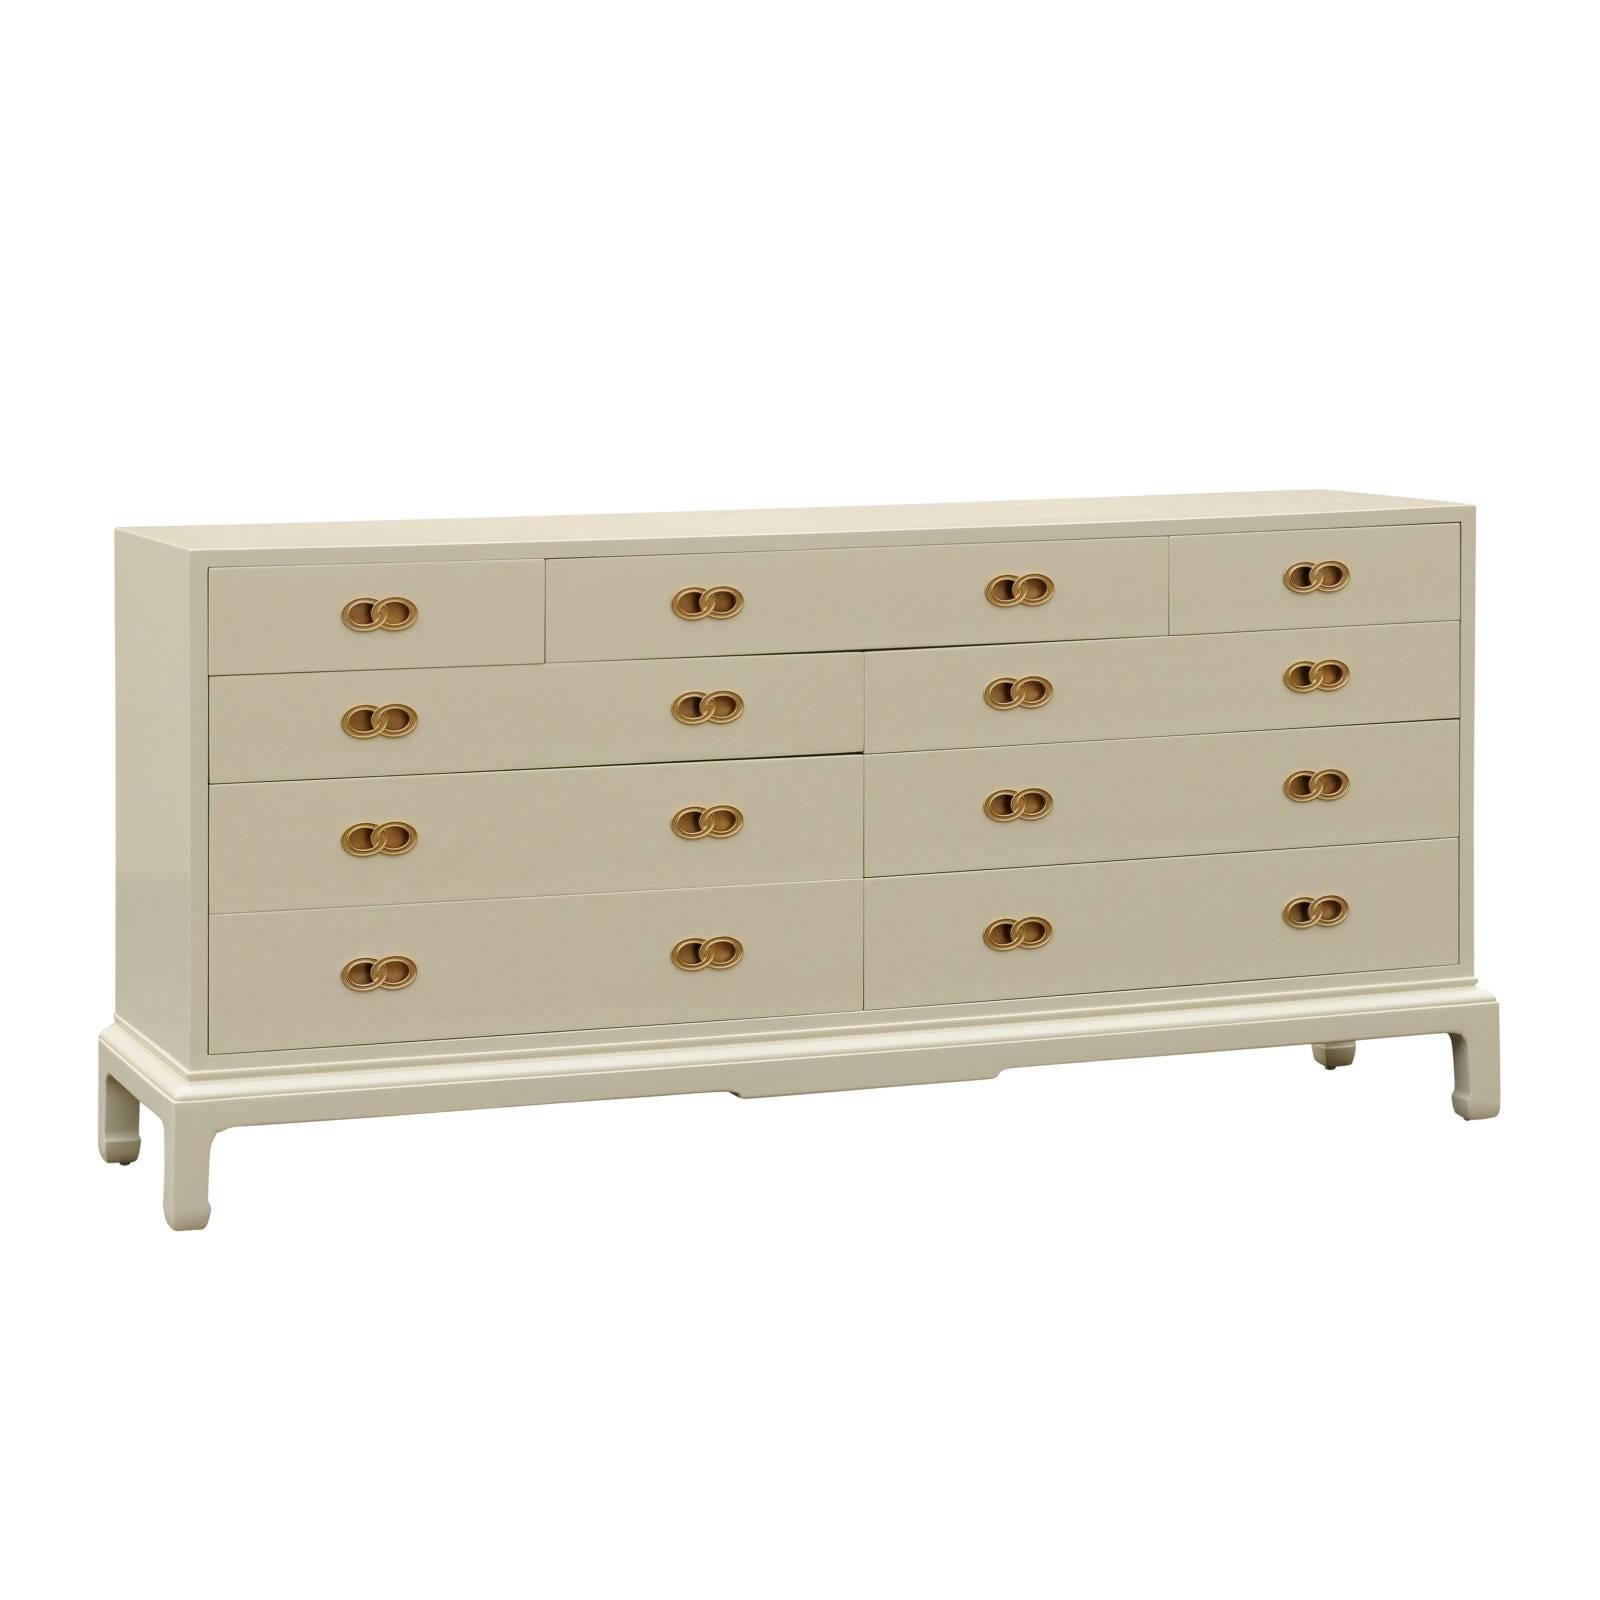 Stylish Restored Ten-Drawer Mahogany Chest by Henredon in Cream Lacquer